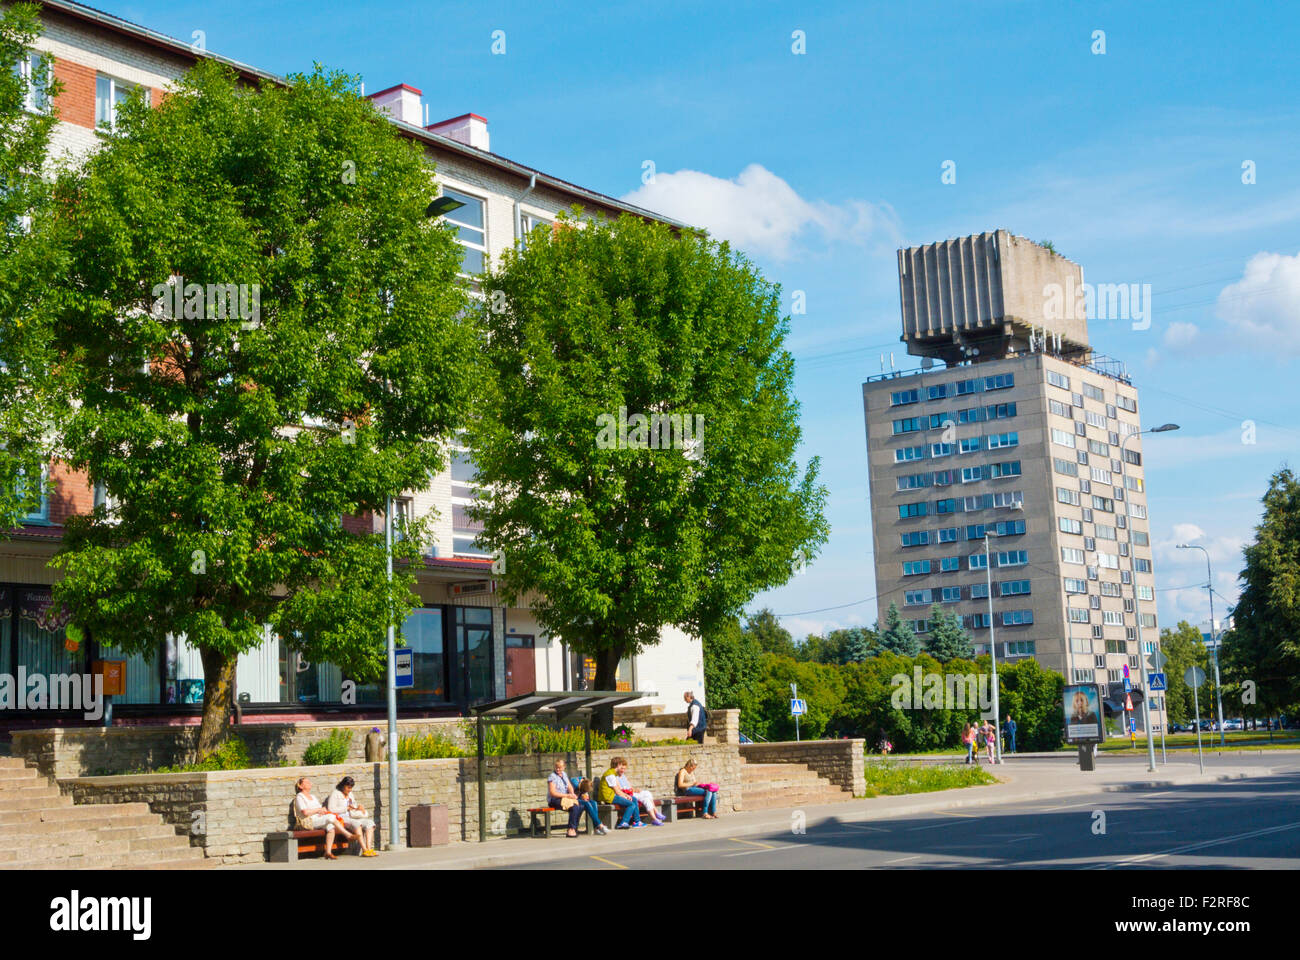 Alexander Pushkini street, with bus stop and residential block with water tank on top, Narva, eastern Estonia Stock Photo